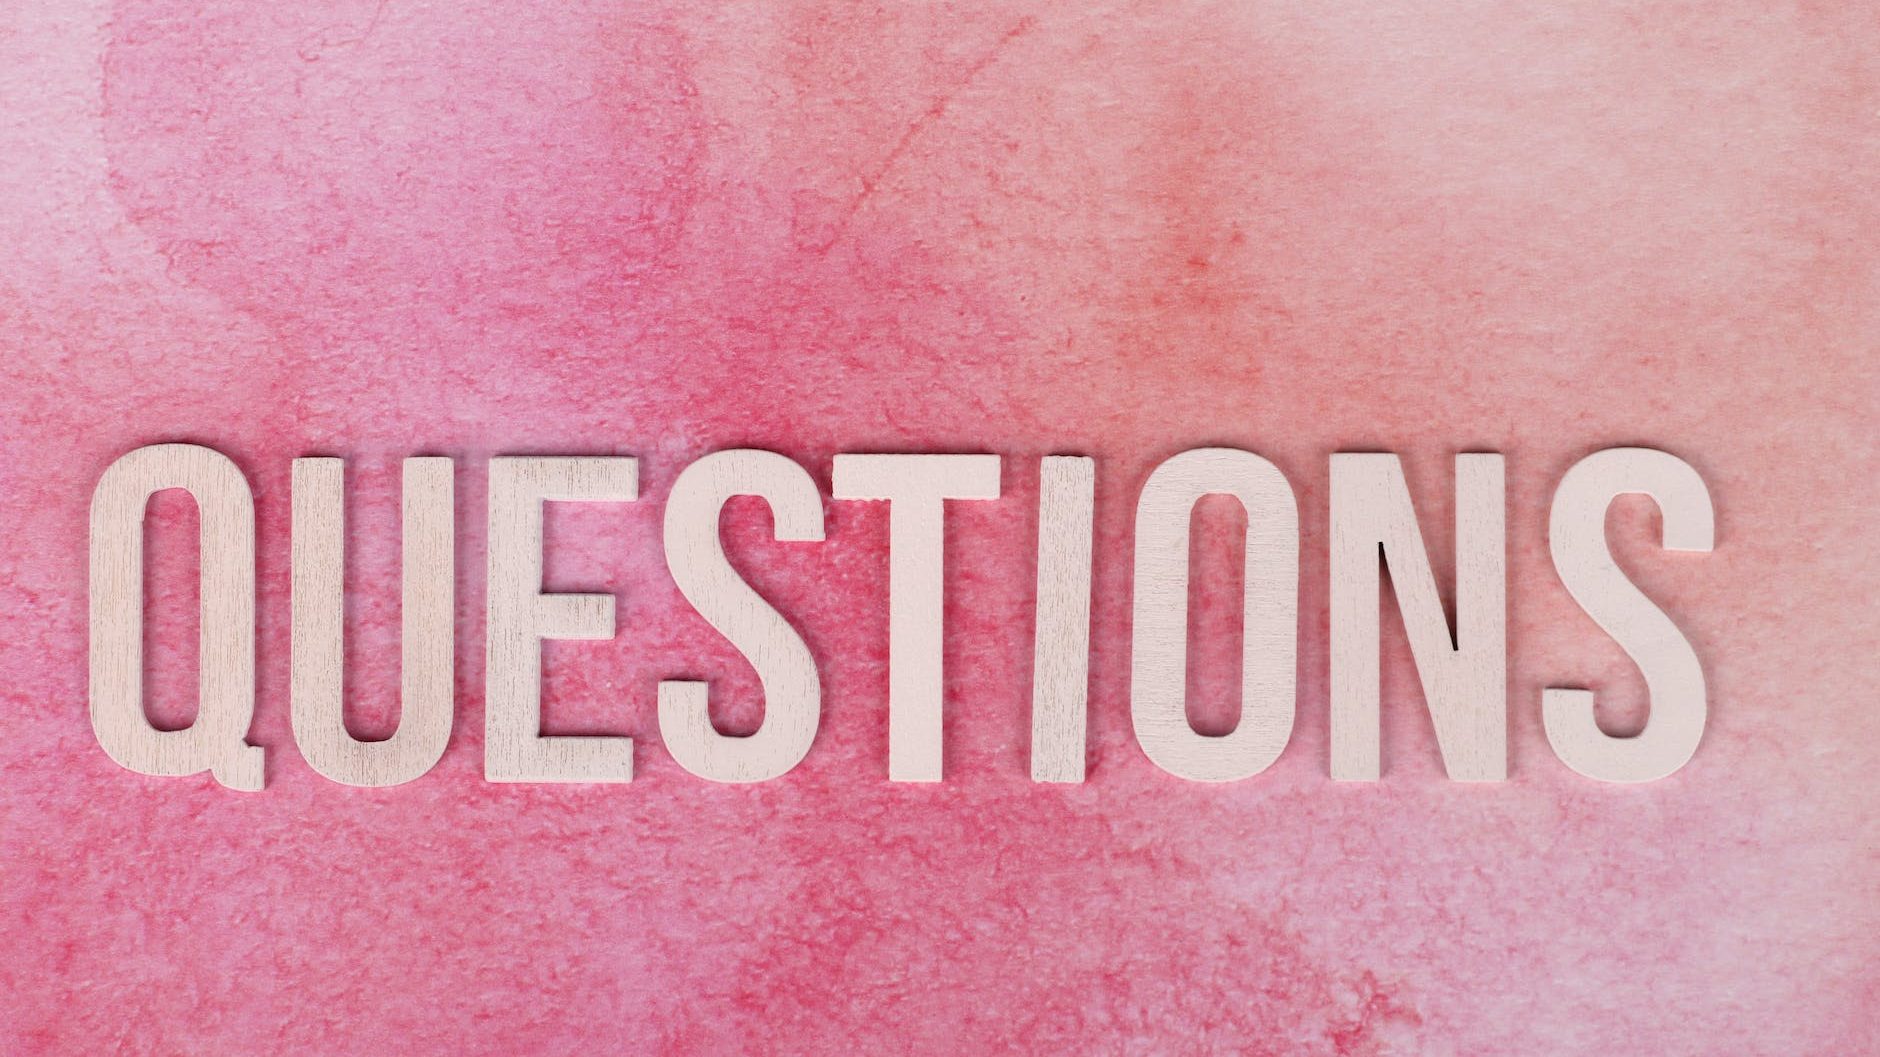 questions text on a pink surface